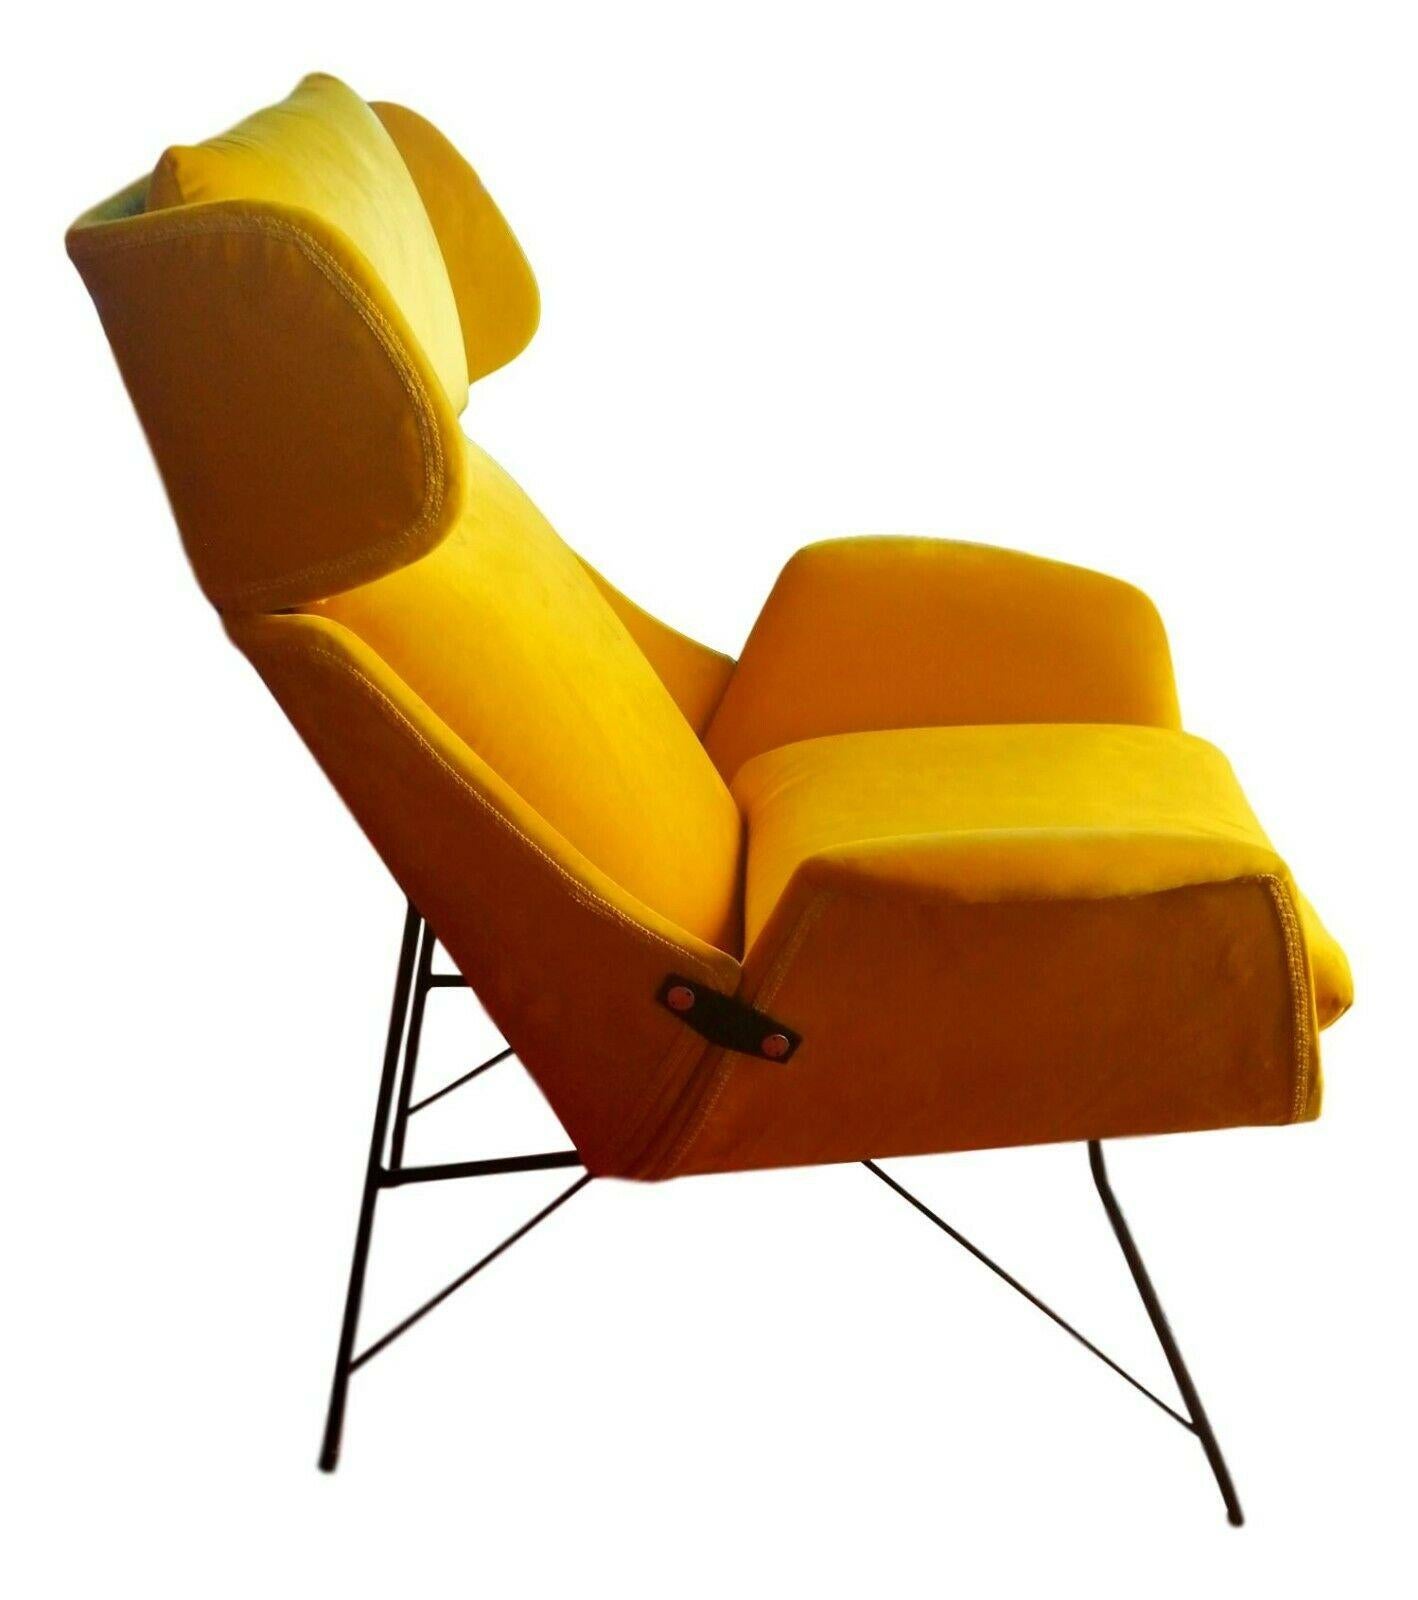 rare splendid armchair designed by Augusto Bozzi for saporiti , early 1950s.

three-section curved plywood structure on black lacquered metal frame

foam padding and cushions, yellow velvet upholstery

it measures just under 110 cm in height,